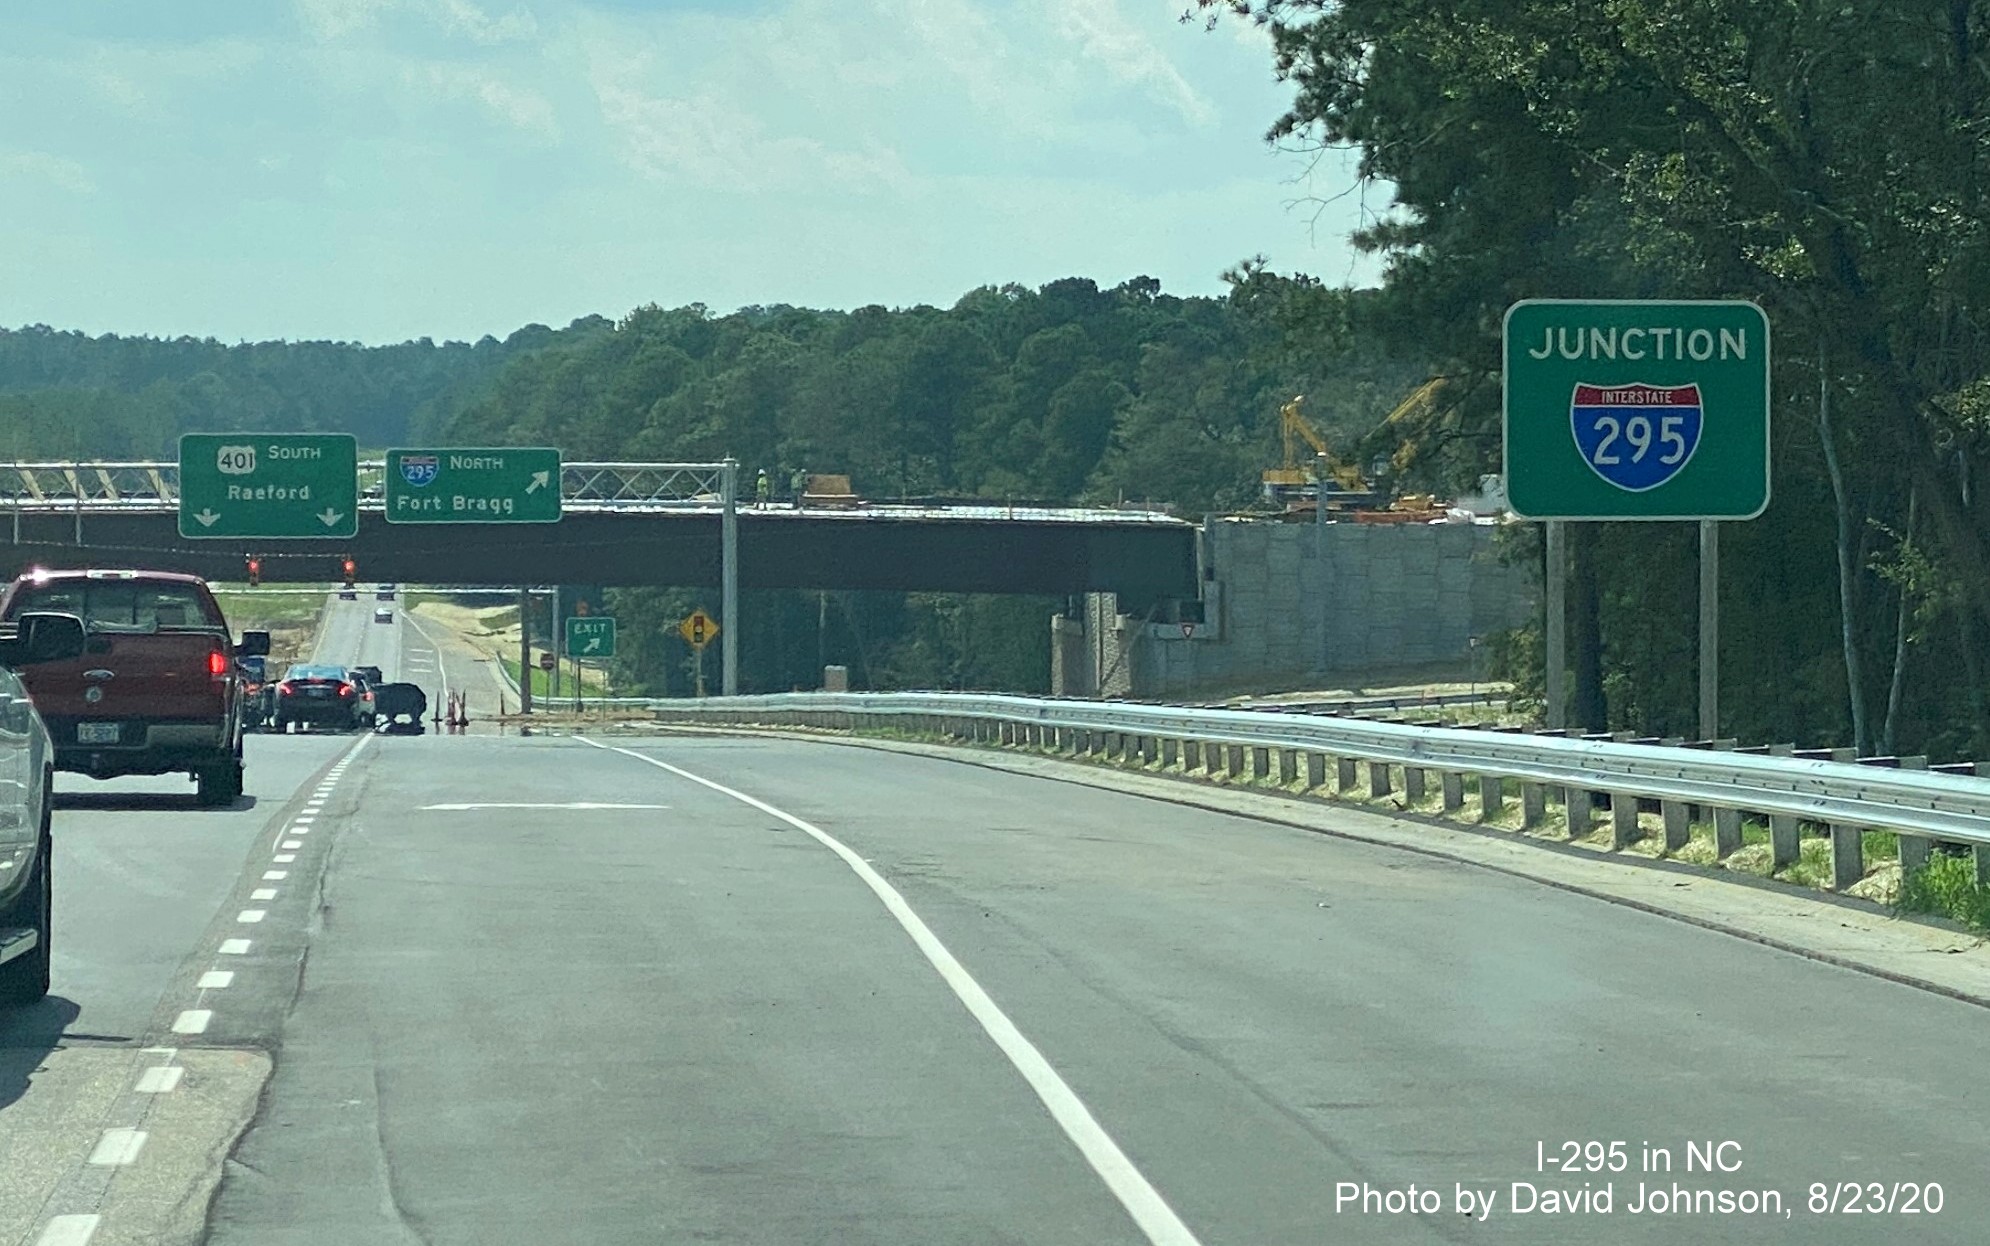 Image of Junction I-295 sign on US 401 South in Fayetteville approaching newly opened I-295 North interchange, 
                                     photo by David Johnson August 2020